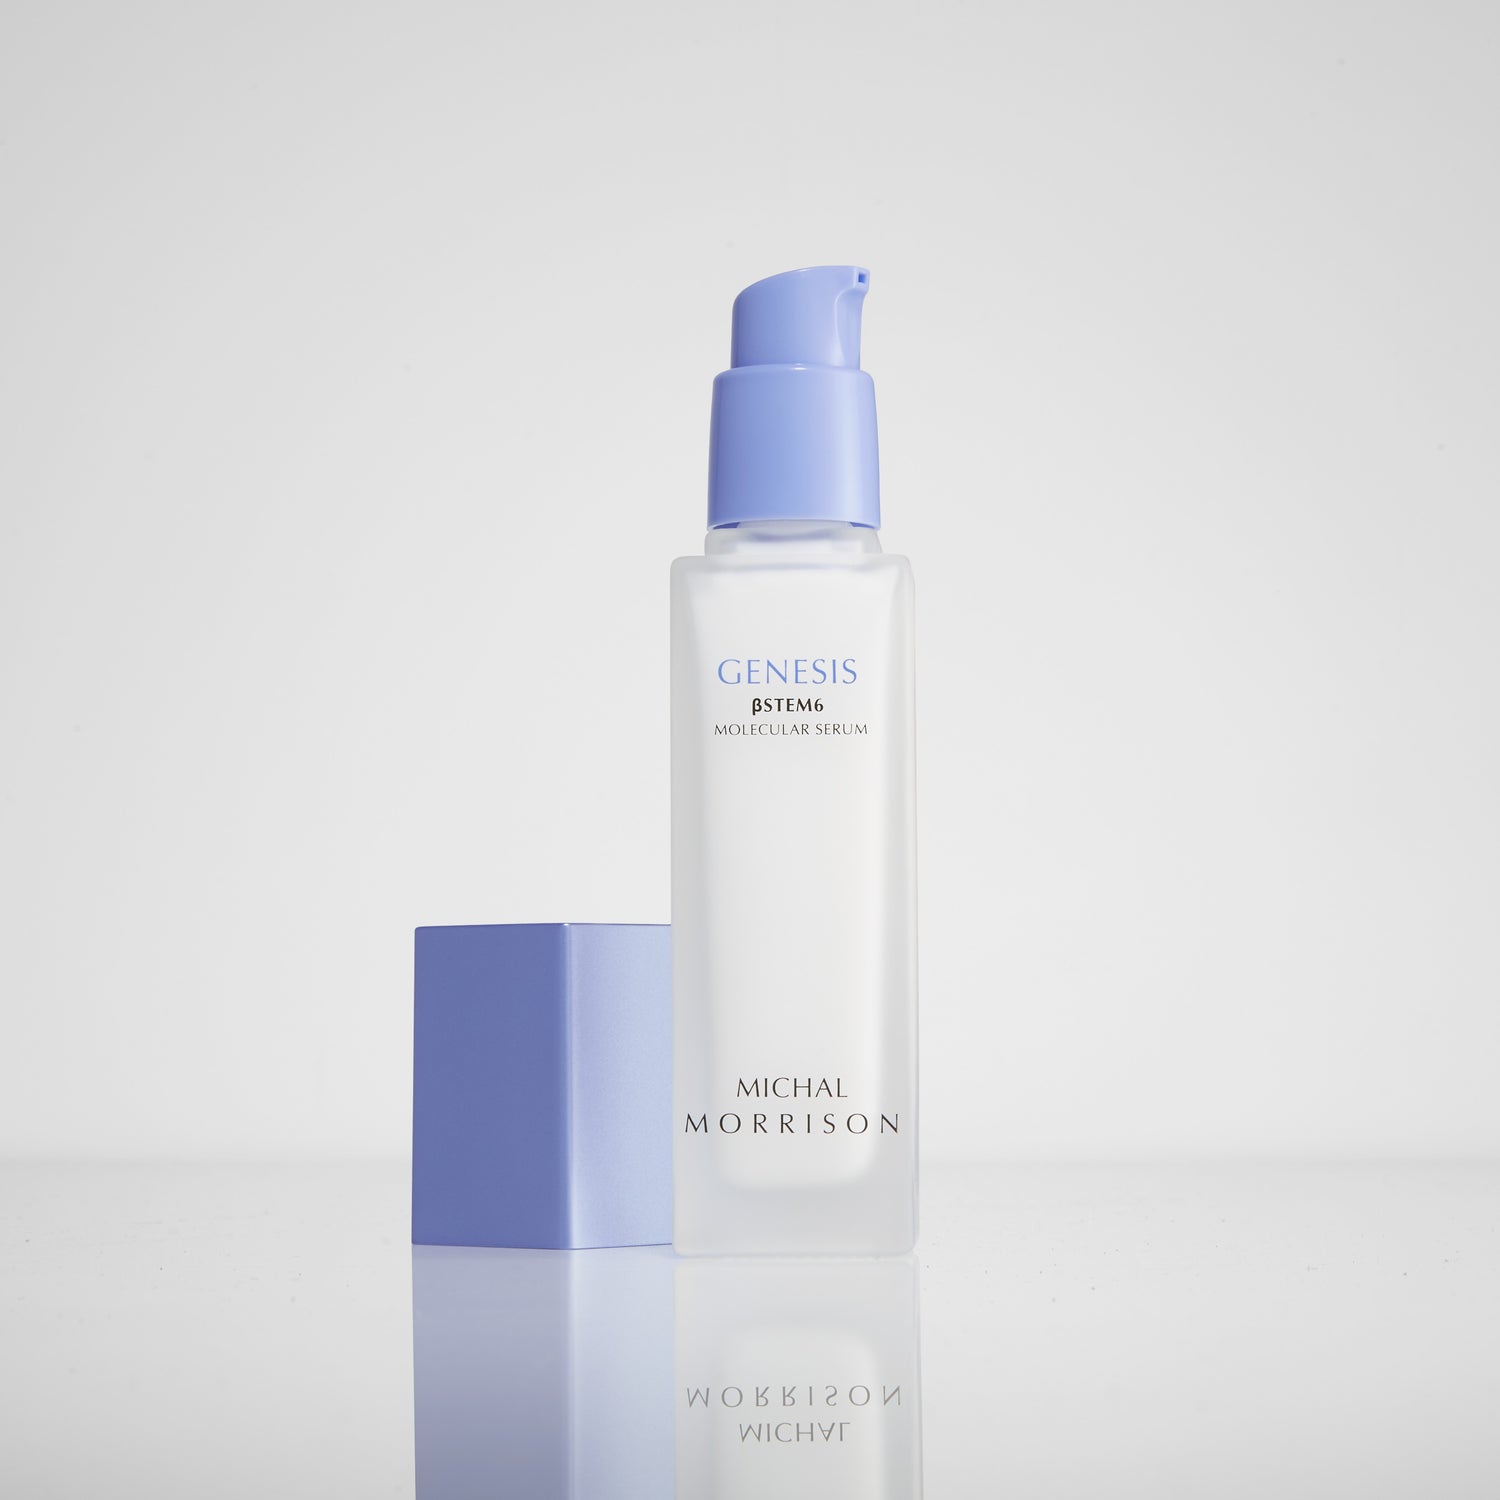 Photo of Michal Morrison Genesis BSTEM6 Molecular Serum in its packaging sitting on gray surface with a white background. The bottle shows a clear rectangular body with a periwinkle pump on top, and a rectangular cap is sitting to its left